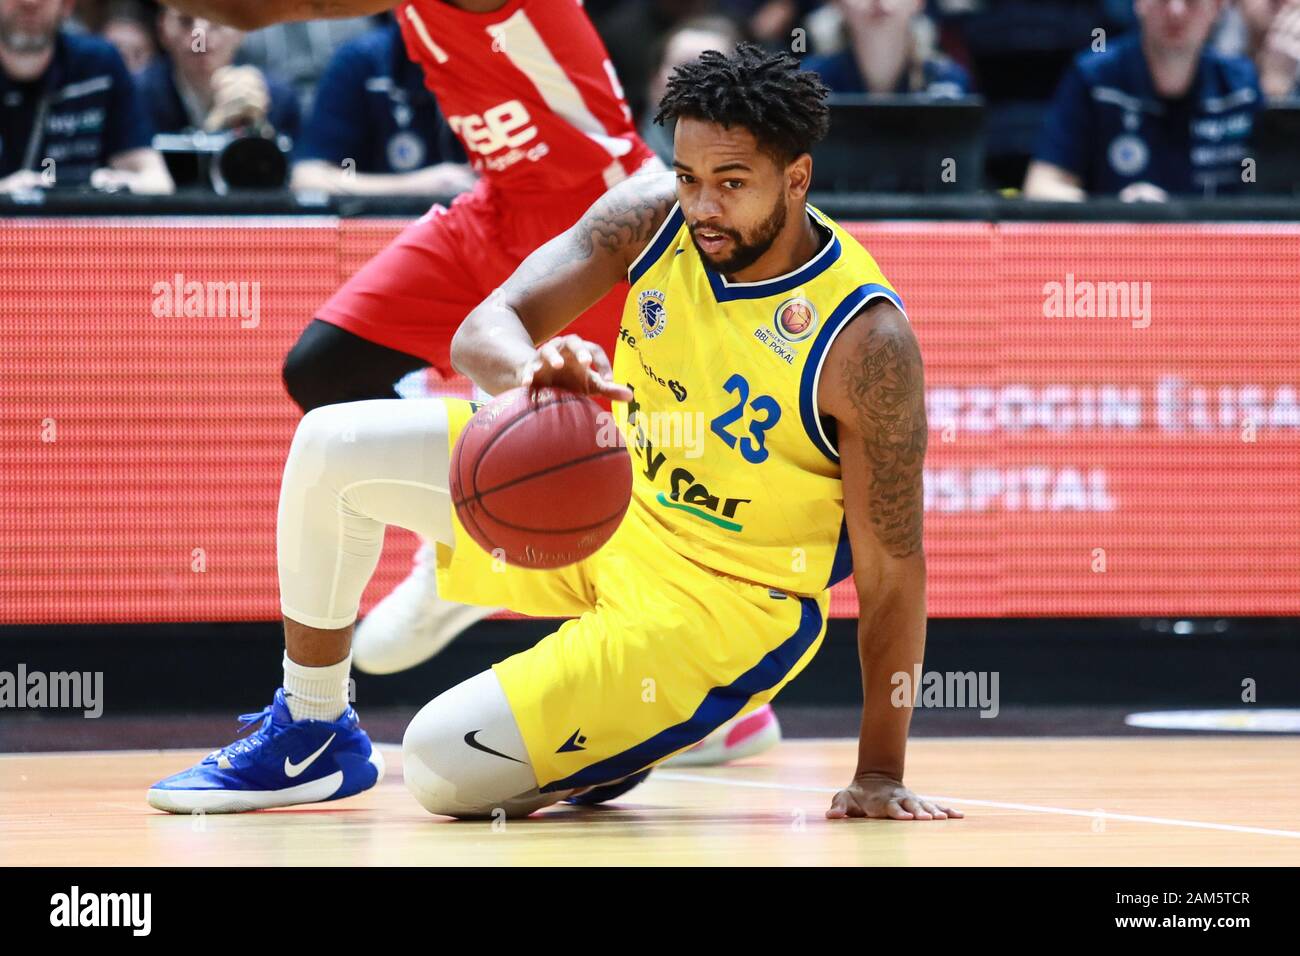 Braunschweig, Germany, December 14, 2019: Basketball player Trevor Releford in action during the Basketball BBL Pokal match Stock Photo